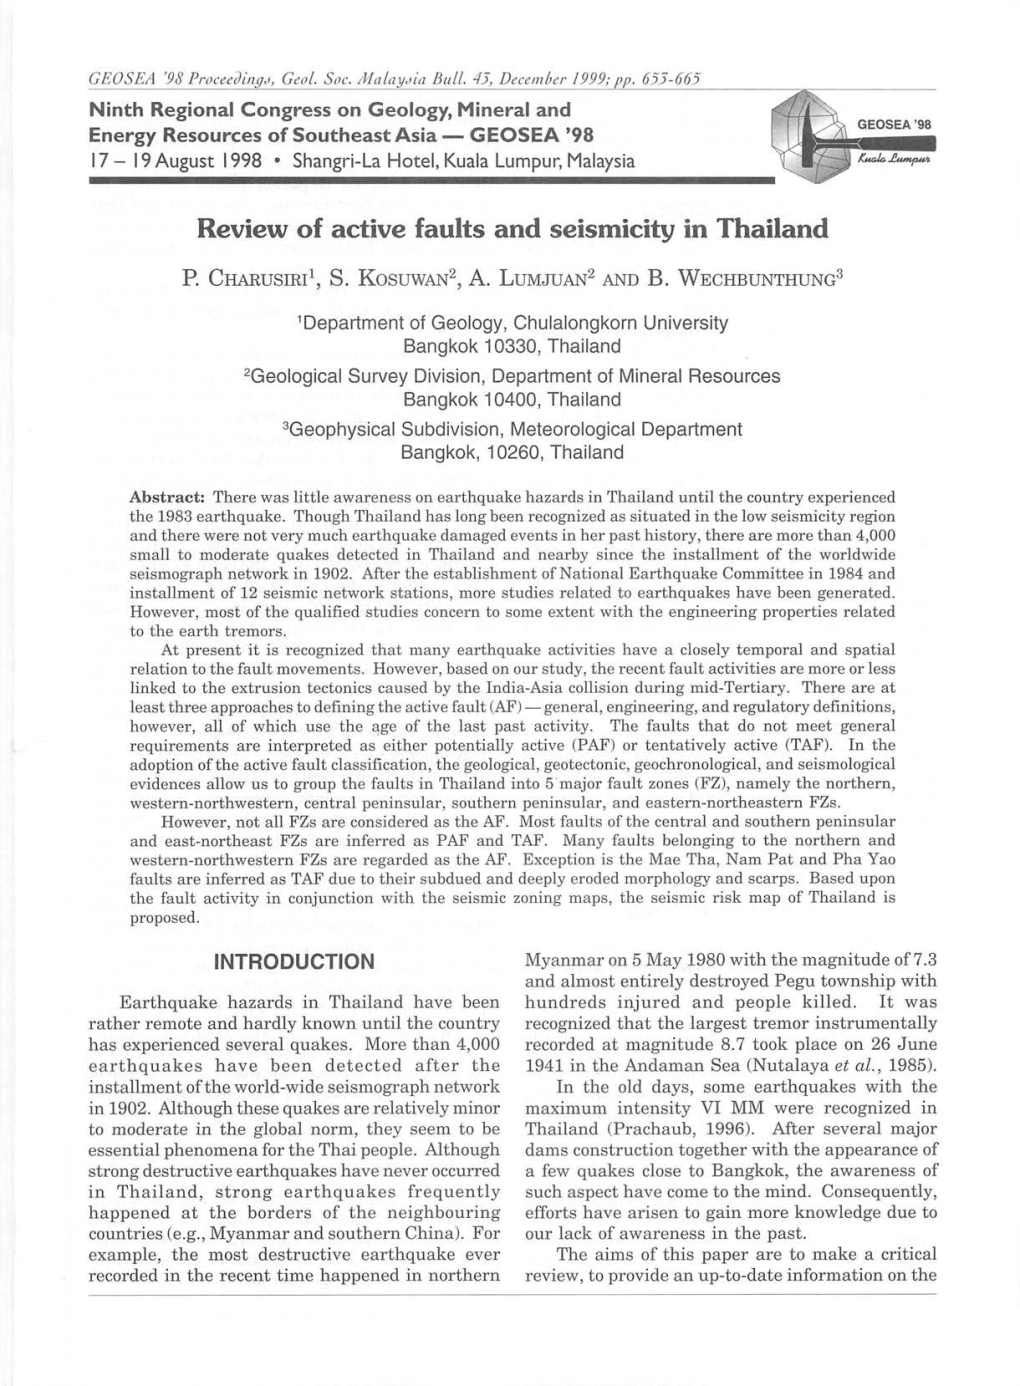 Review of Active Faults and Seismicity in Thailand